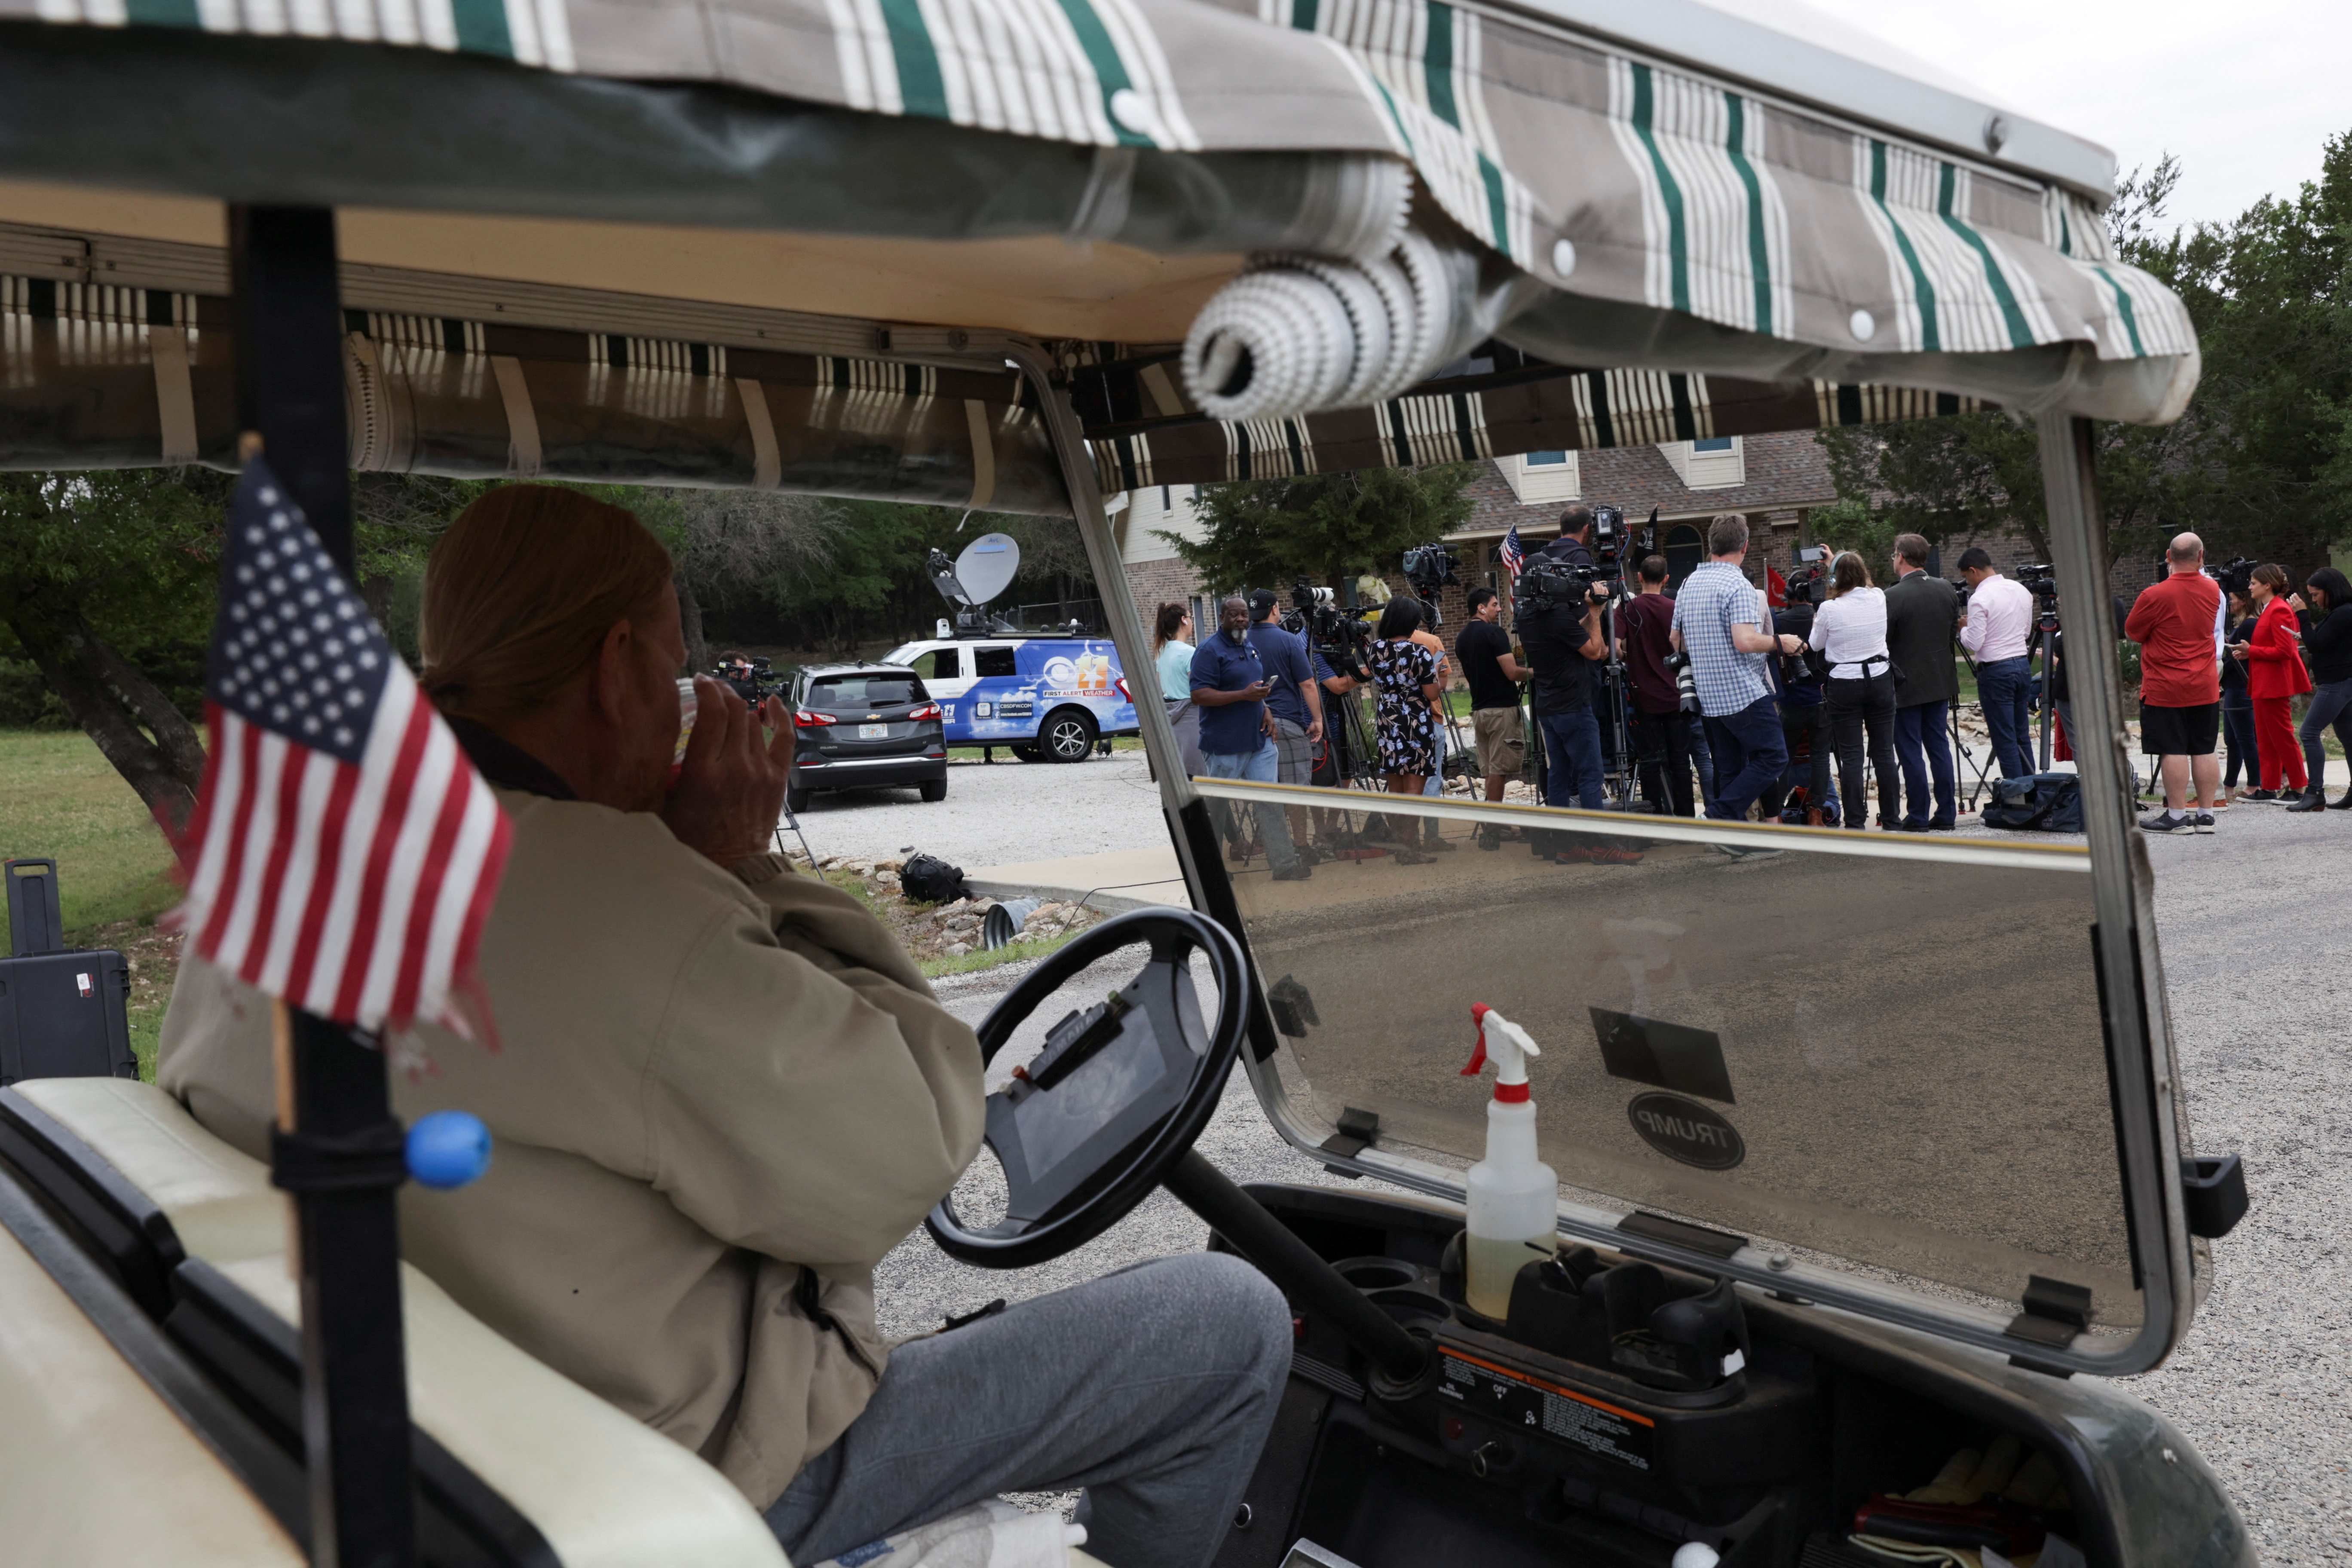 Neighbor Herby Mitchell watches a news conference concerning the homecoming of U.S. Marine Trevor Reed, in Granbury